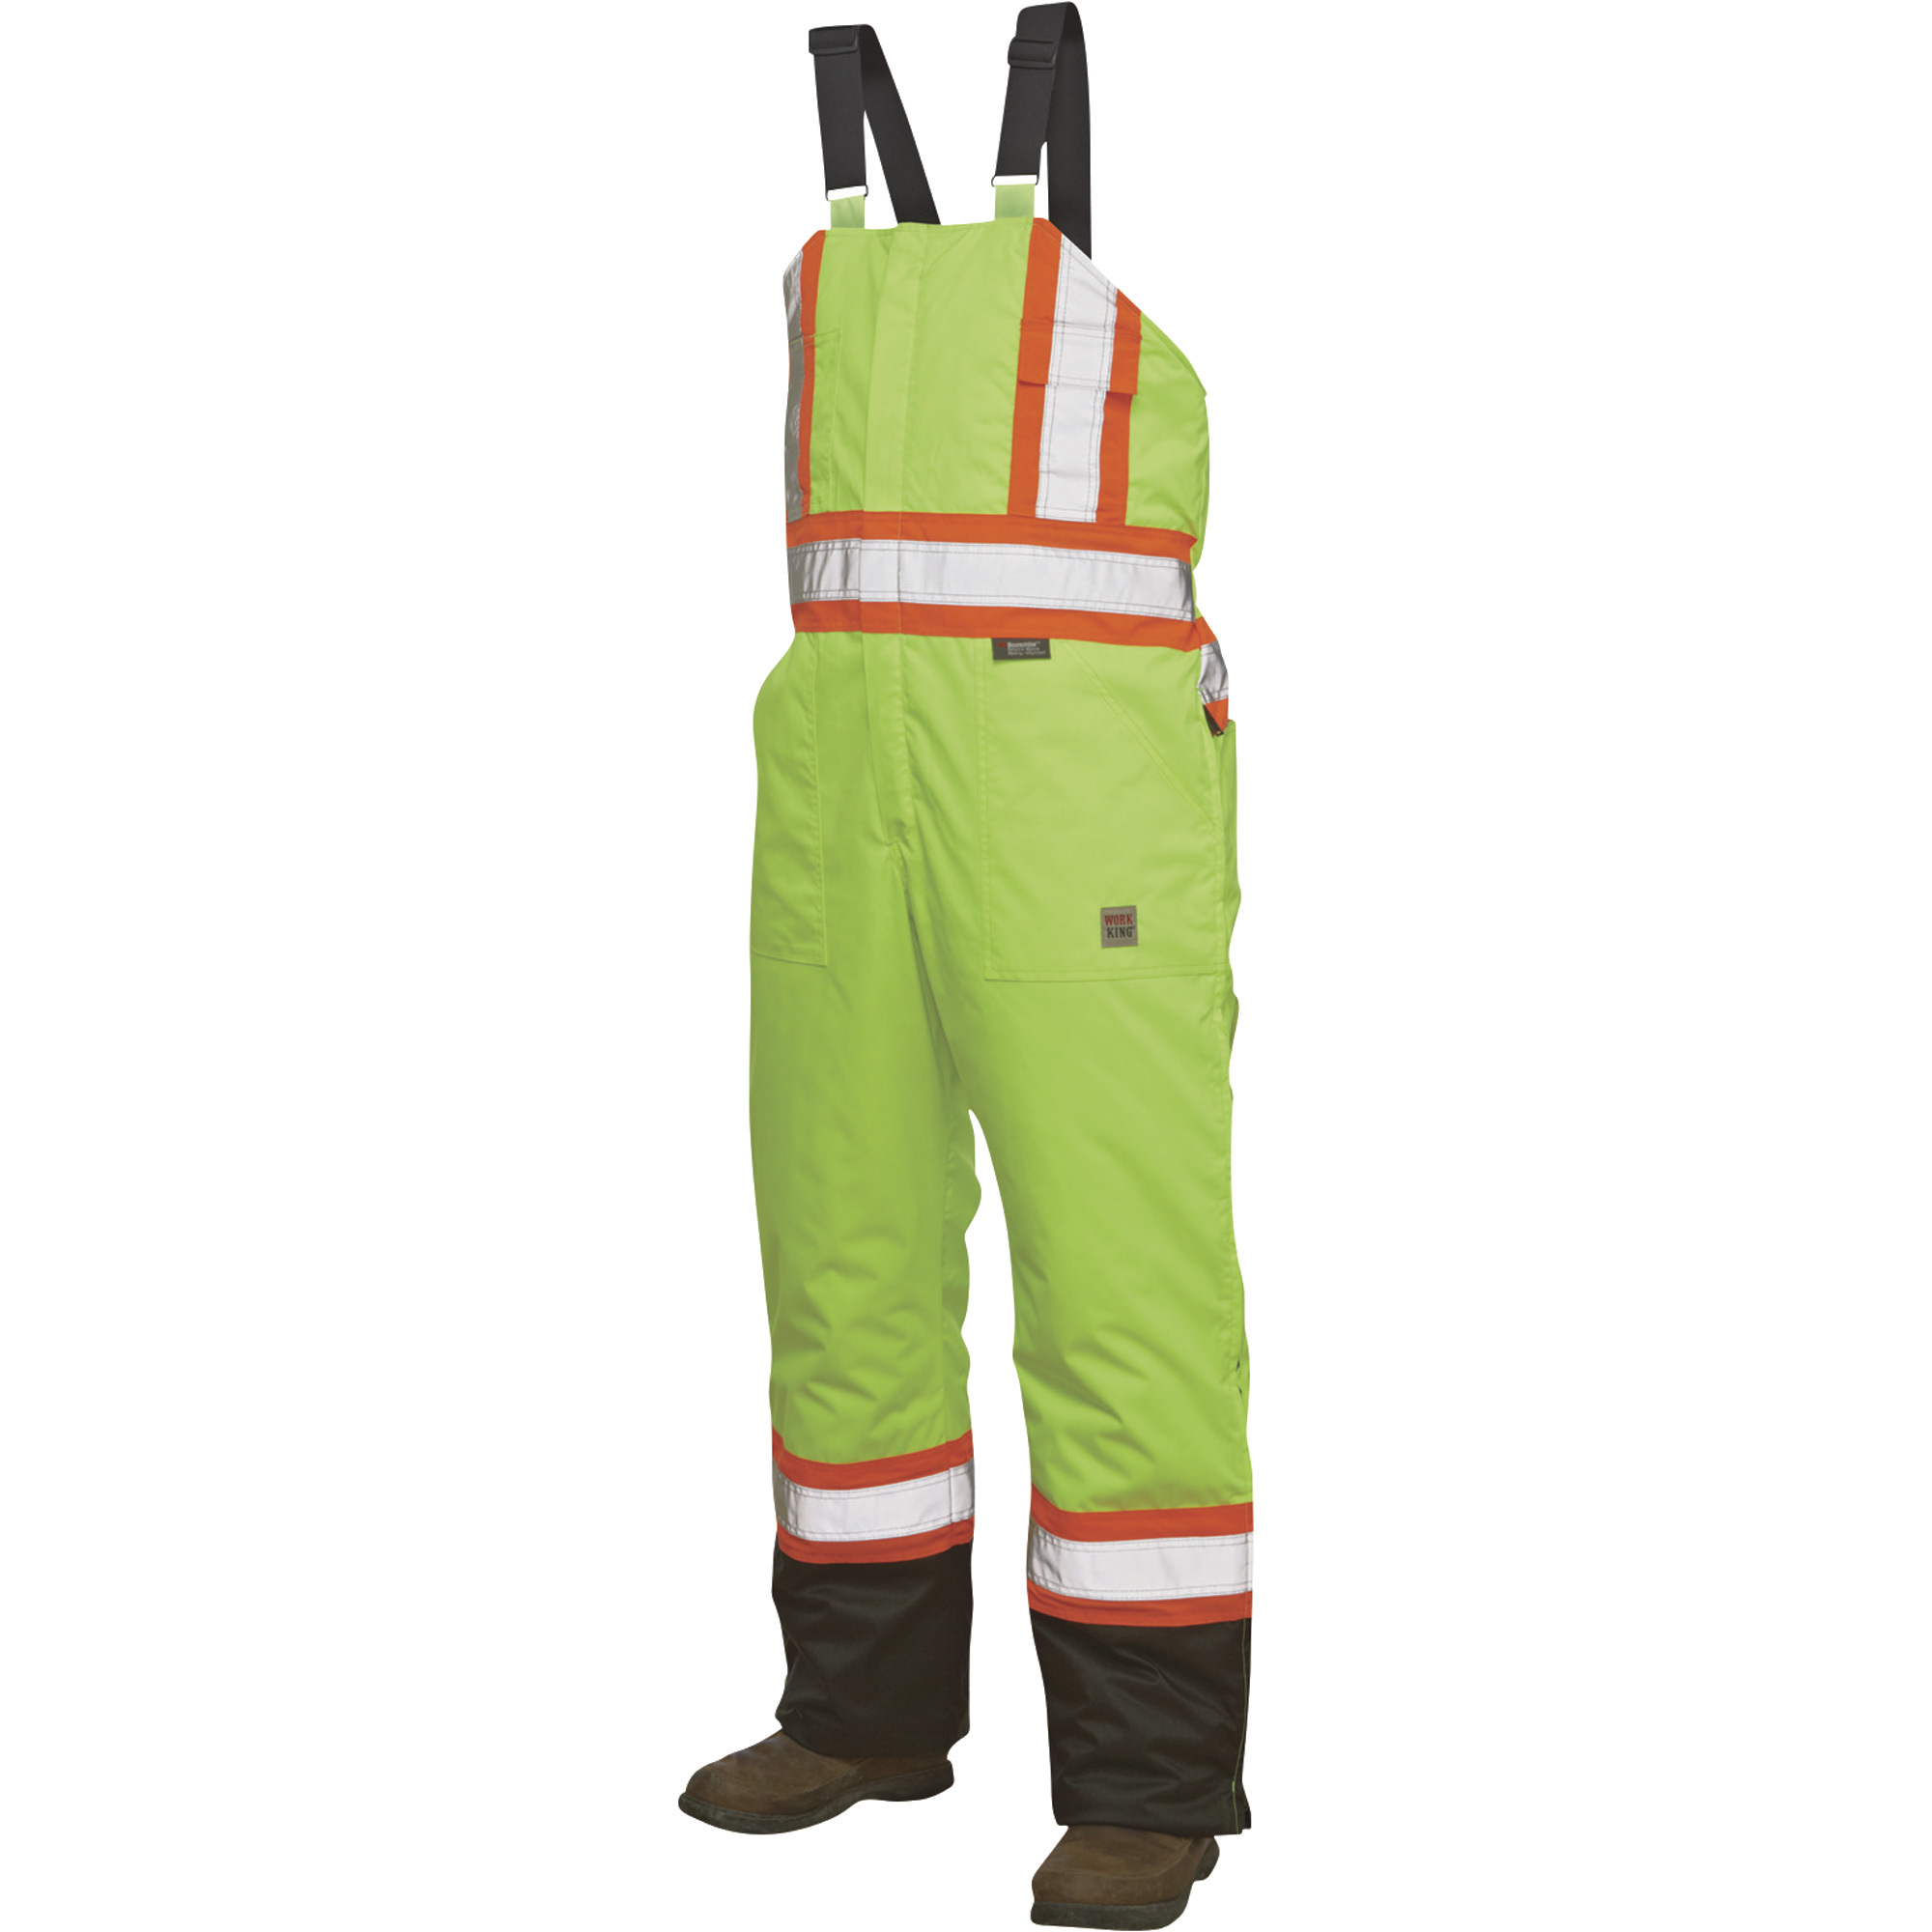 Work King Men's Class 2 High Visibility Lined Bib Overall â Lime, Large, Model S79811-FLGR-L